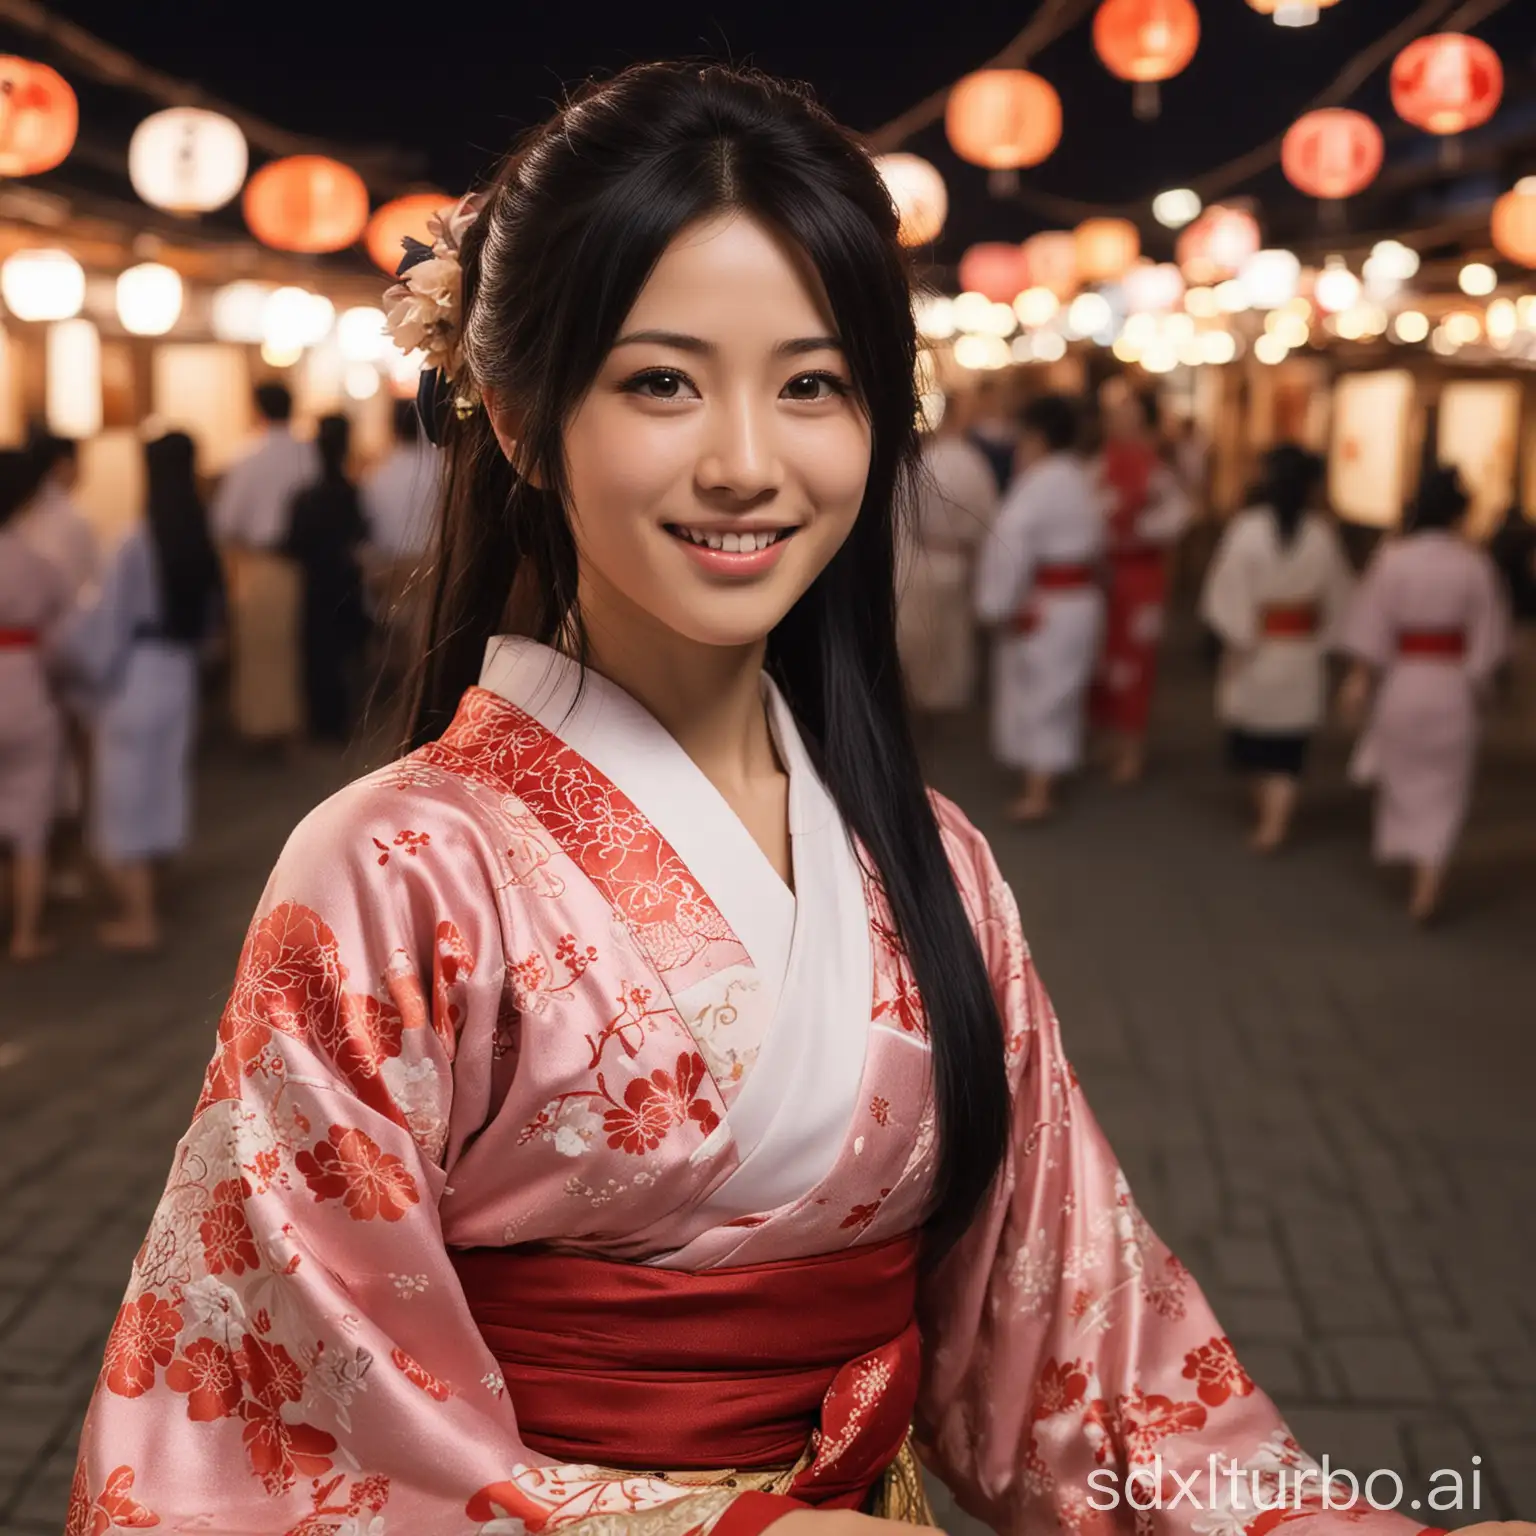 Generate an image of Akira Hoshino, age 25, with long straight black hair, dark brown eyes, and a beautiful smile, dressed up in Japanese outfit, having fun and laughter playing kingyo-sukui during summer festival. It is a night scene